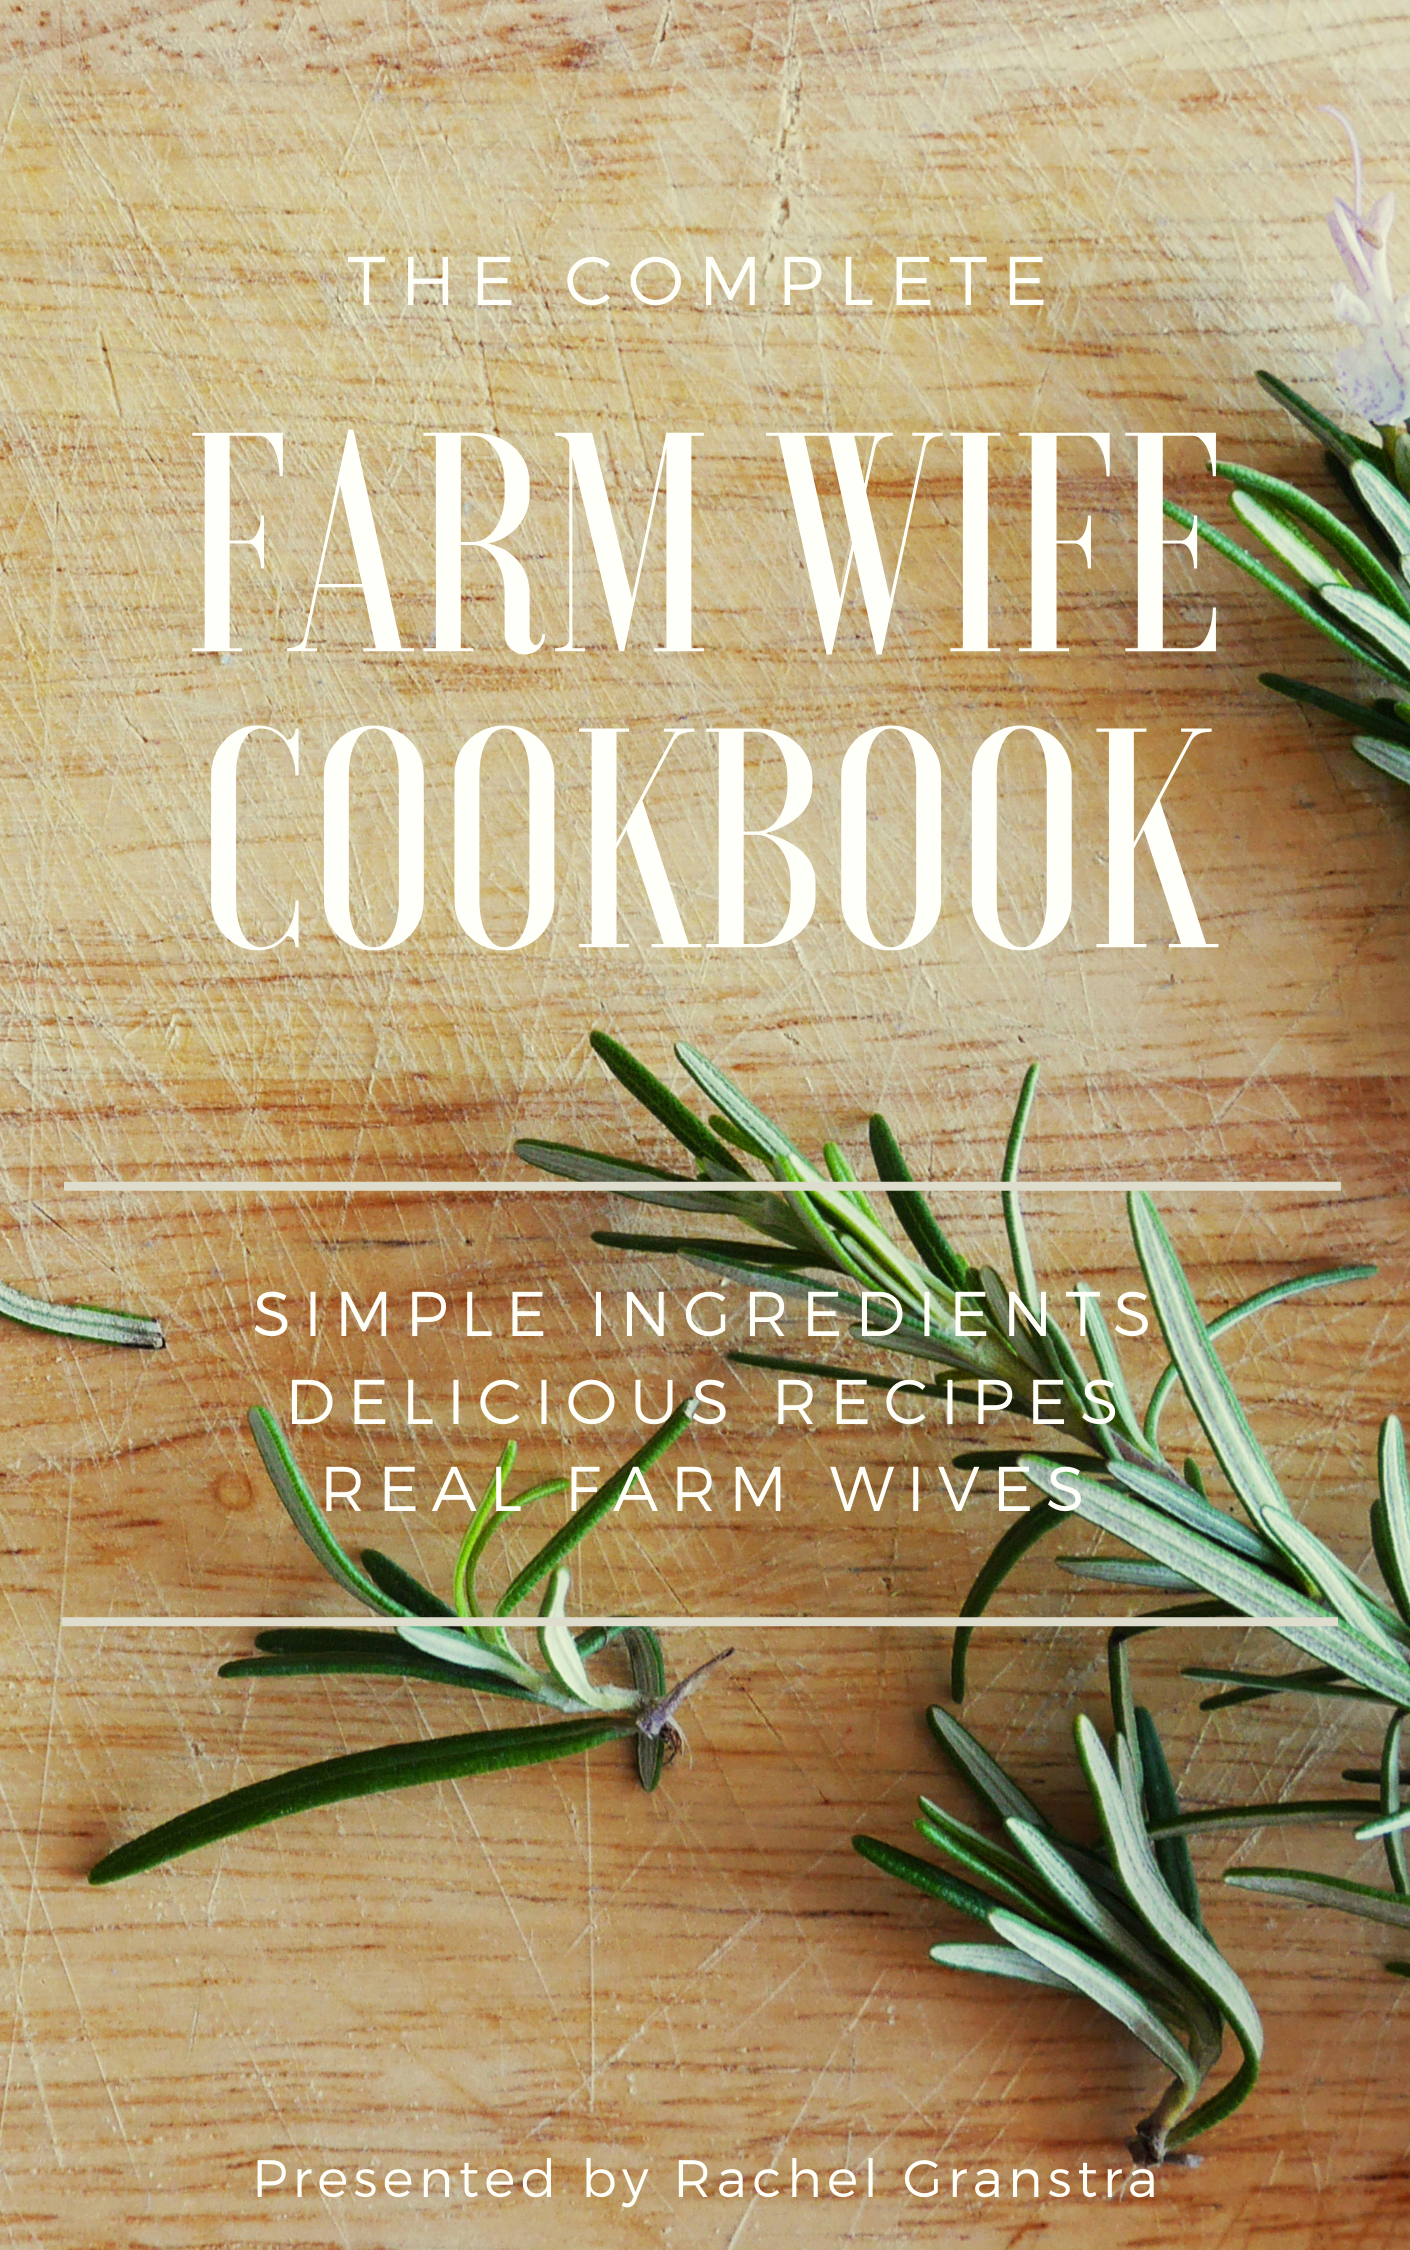 Complete farm wife cookbook image for display